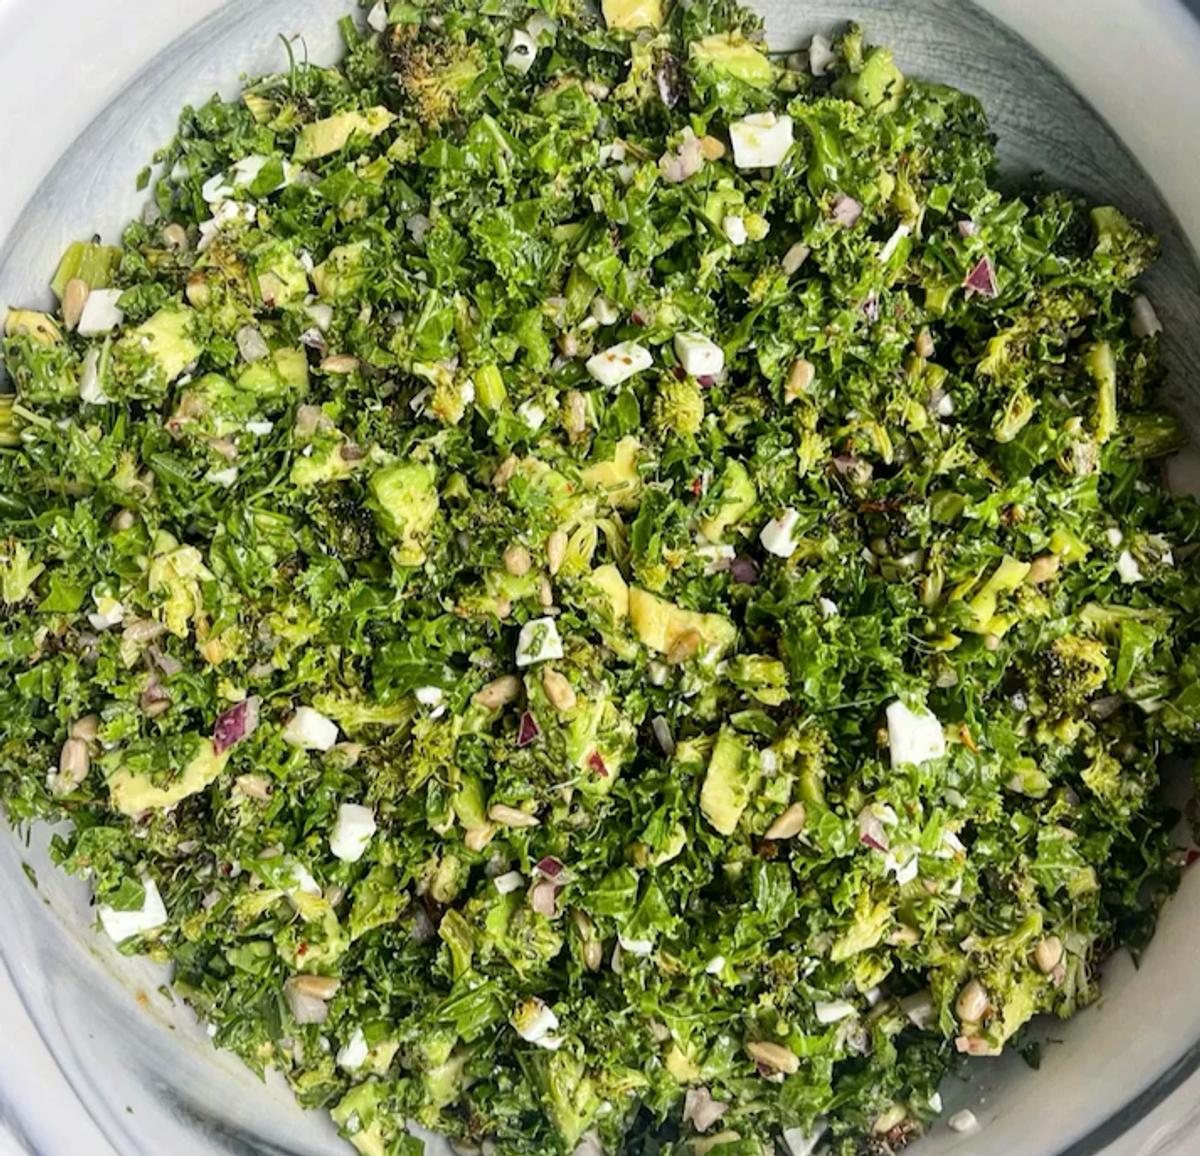 Image of kale salad with avocado, red onion, and feta